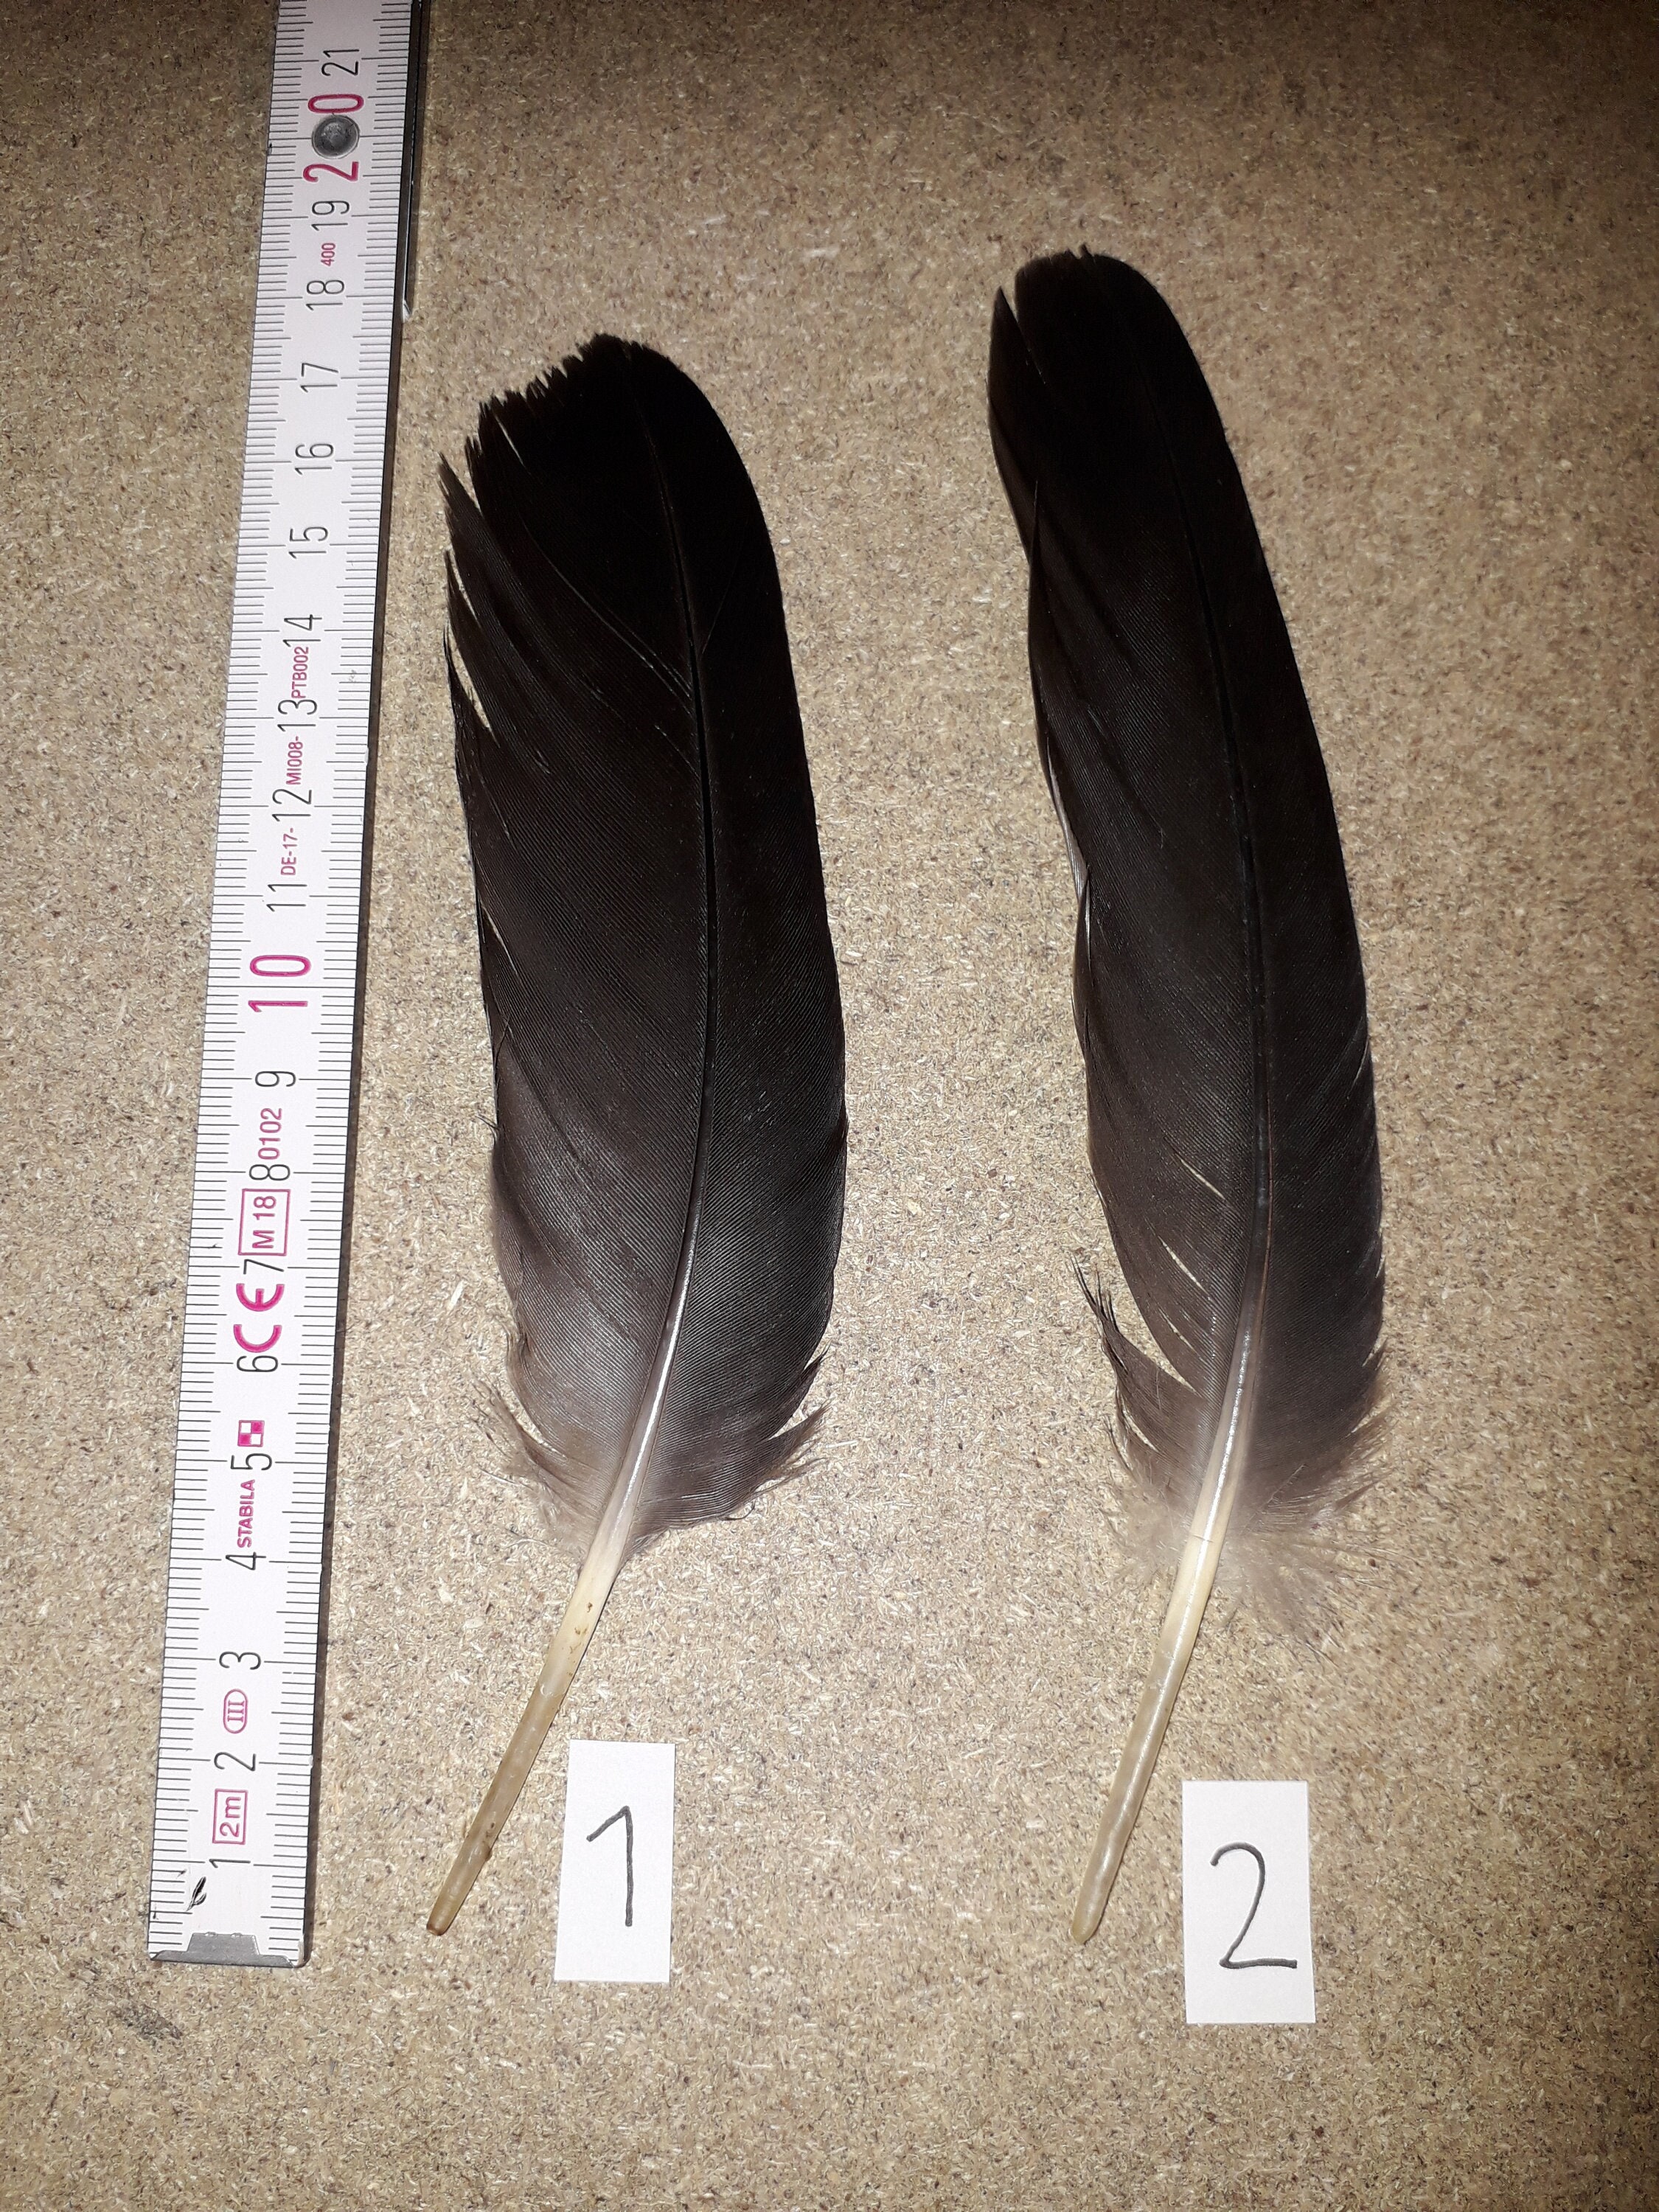 100 Pcs Brown Goose Feathers Goose Round Quill Feathers 5-7inch Long 